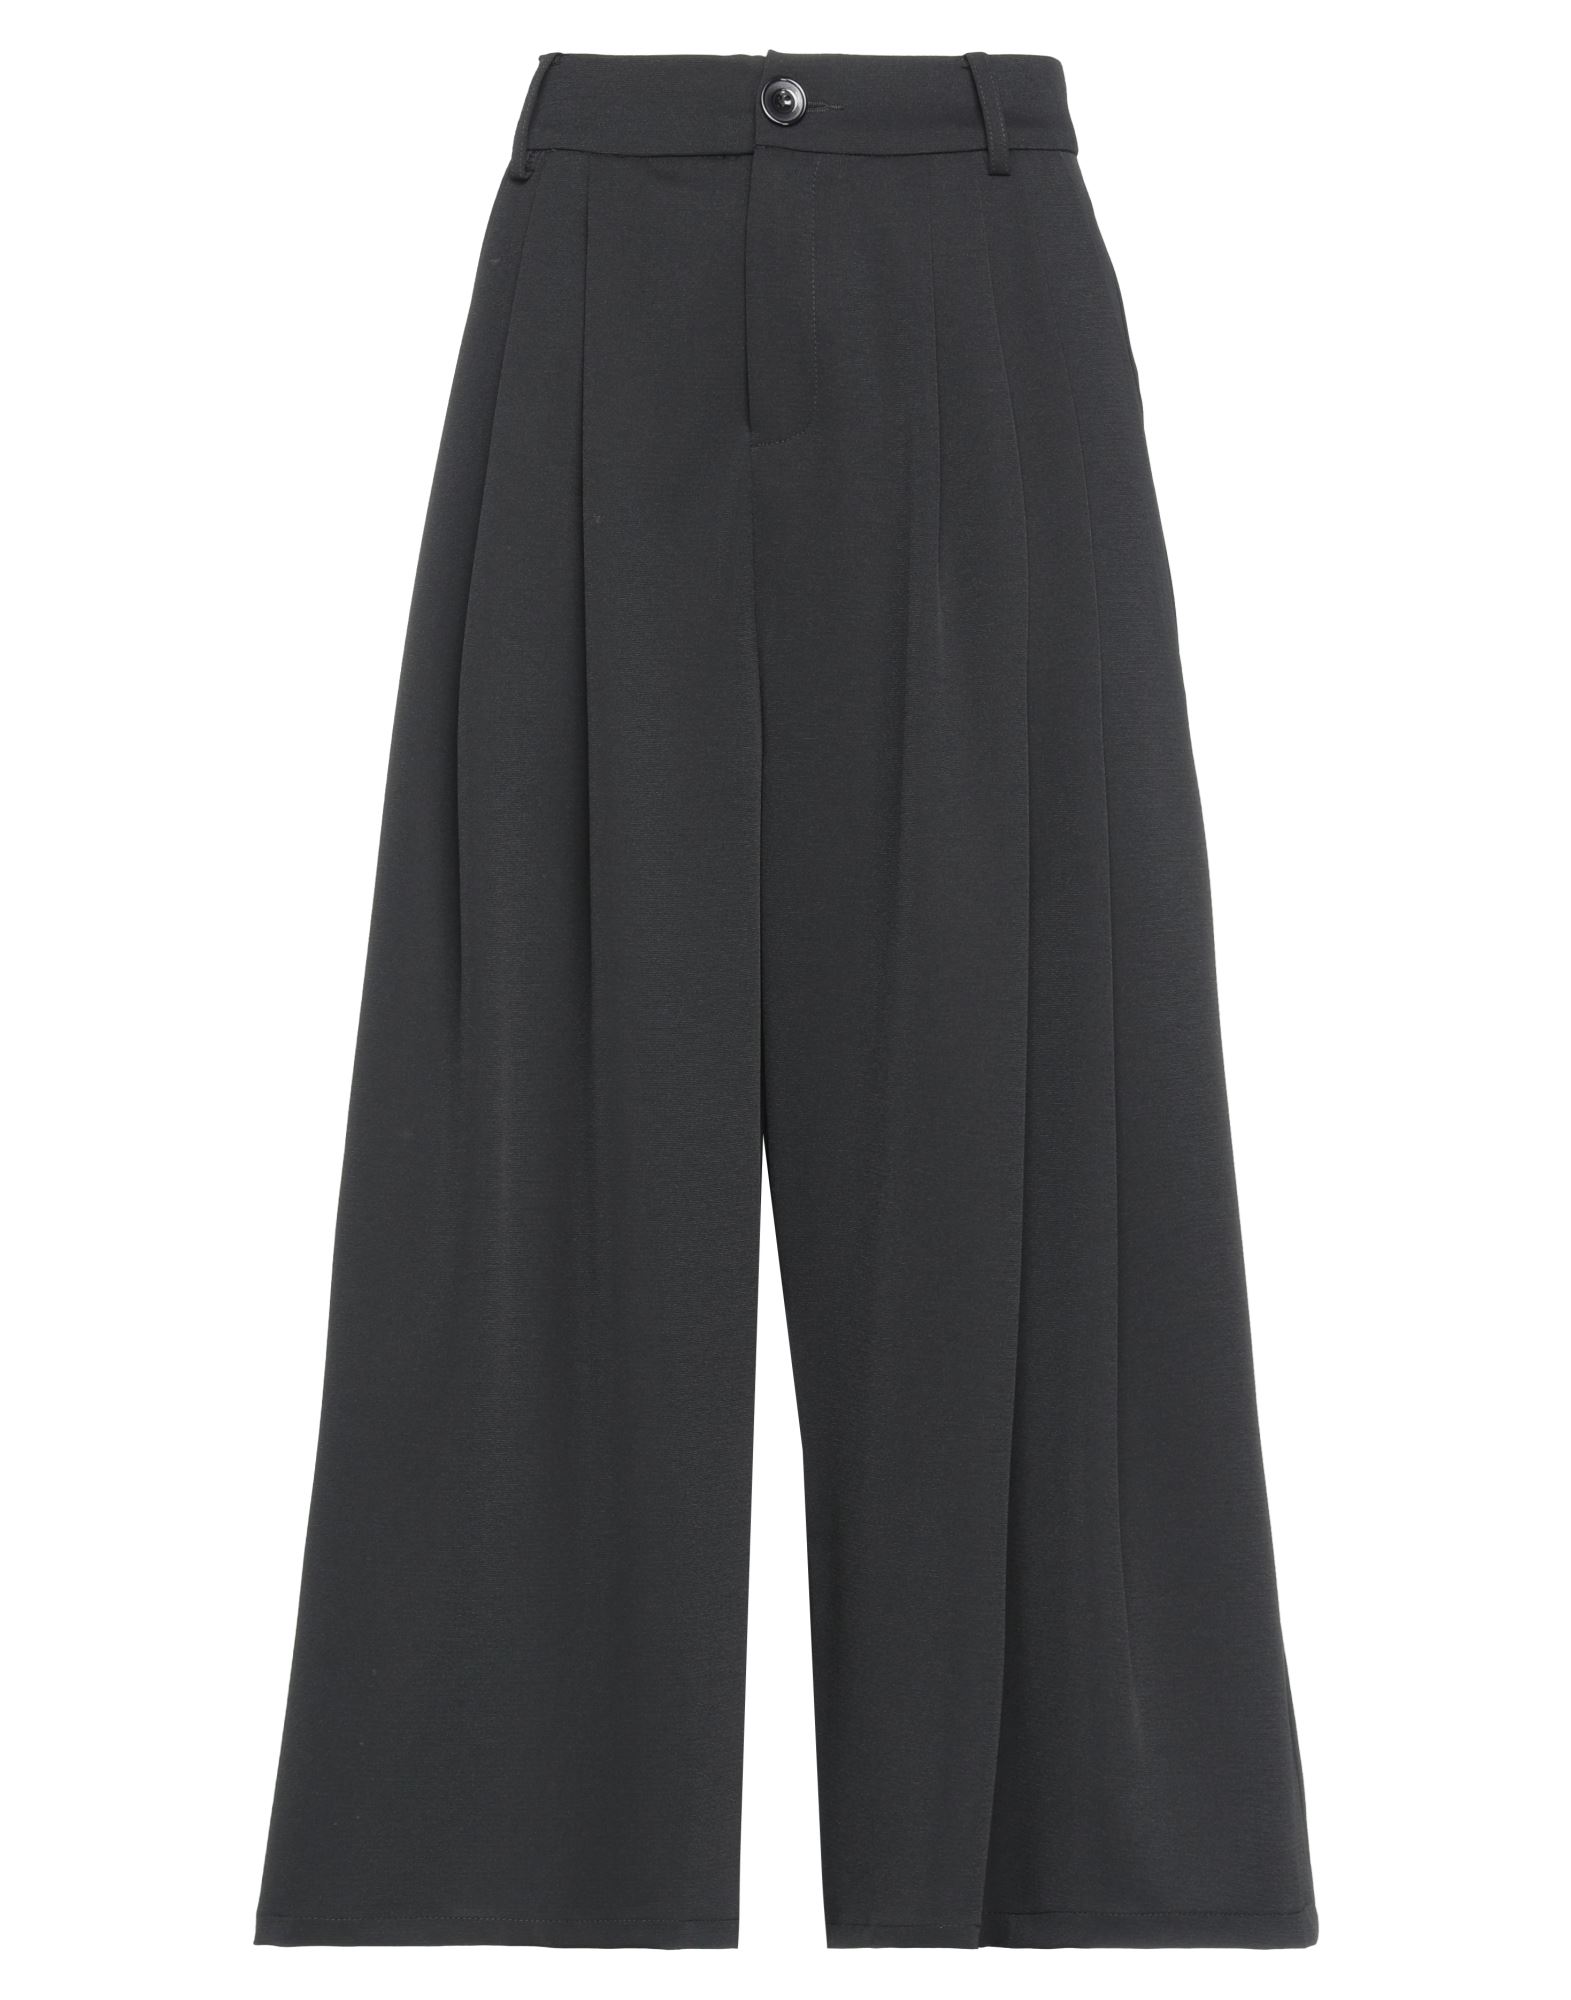 Anonyme Designers Cropped Pants In Black